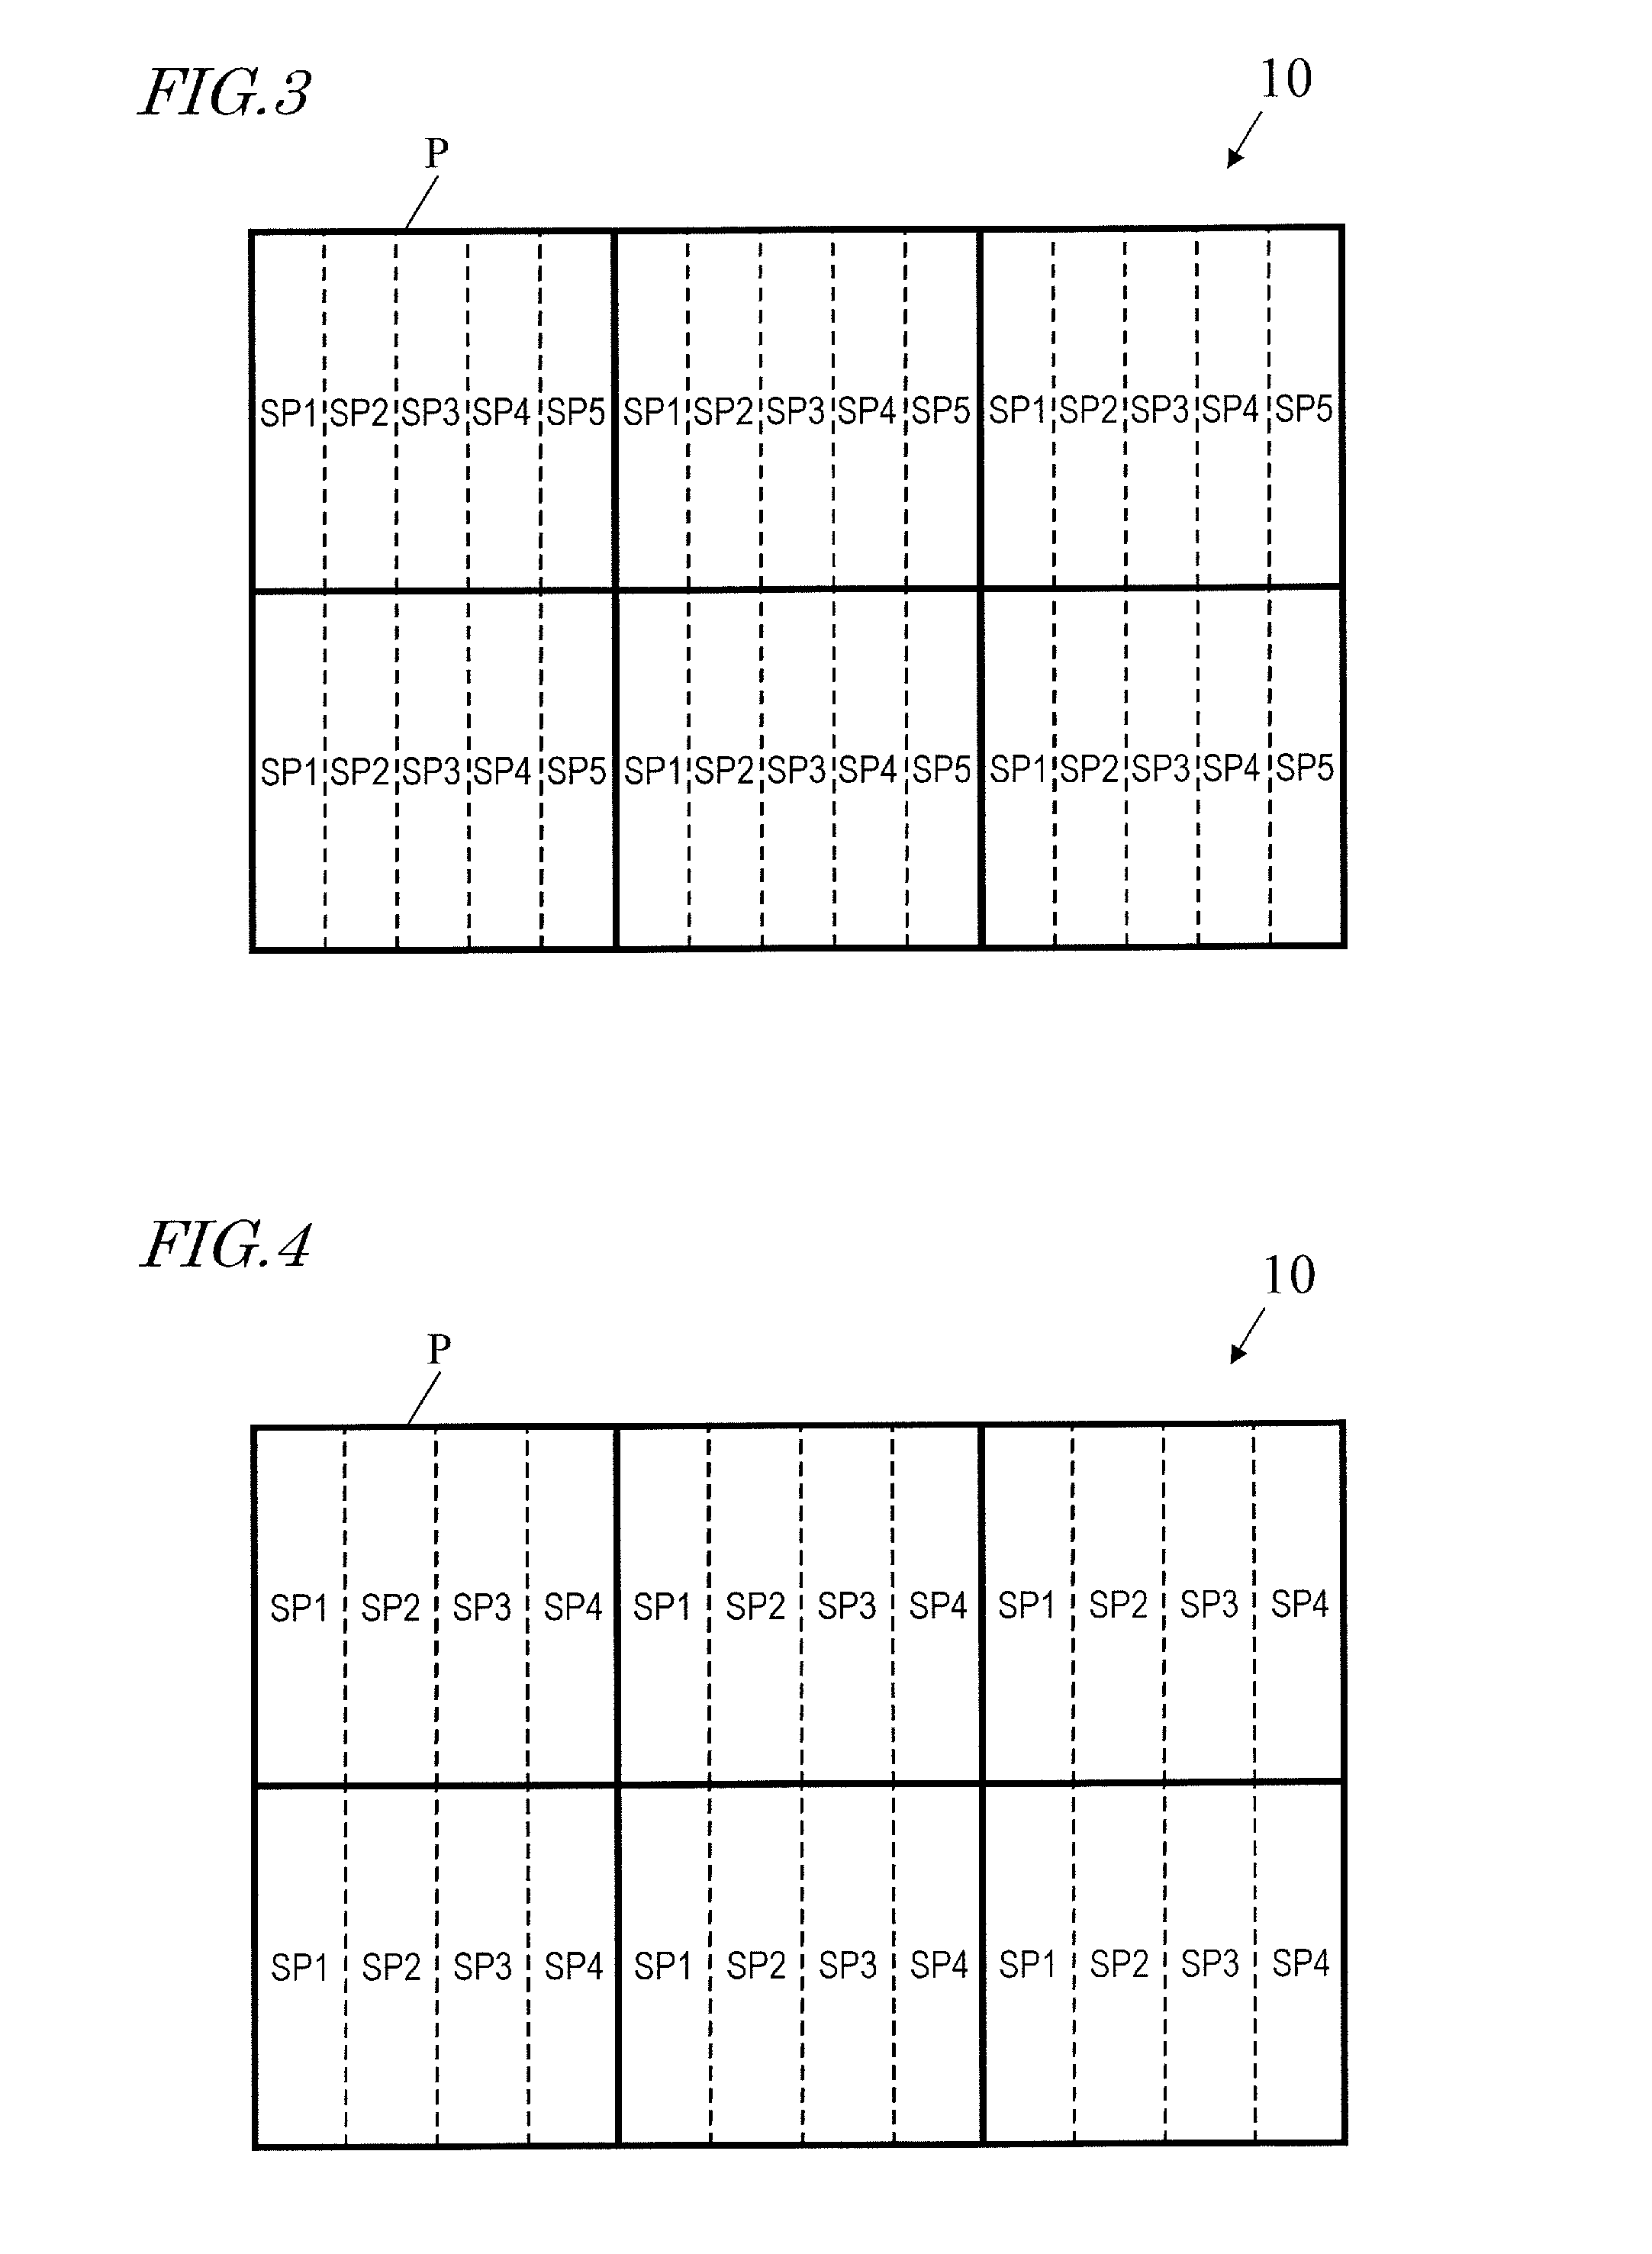 Multi-primary color display device